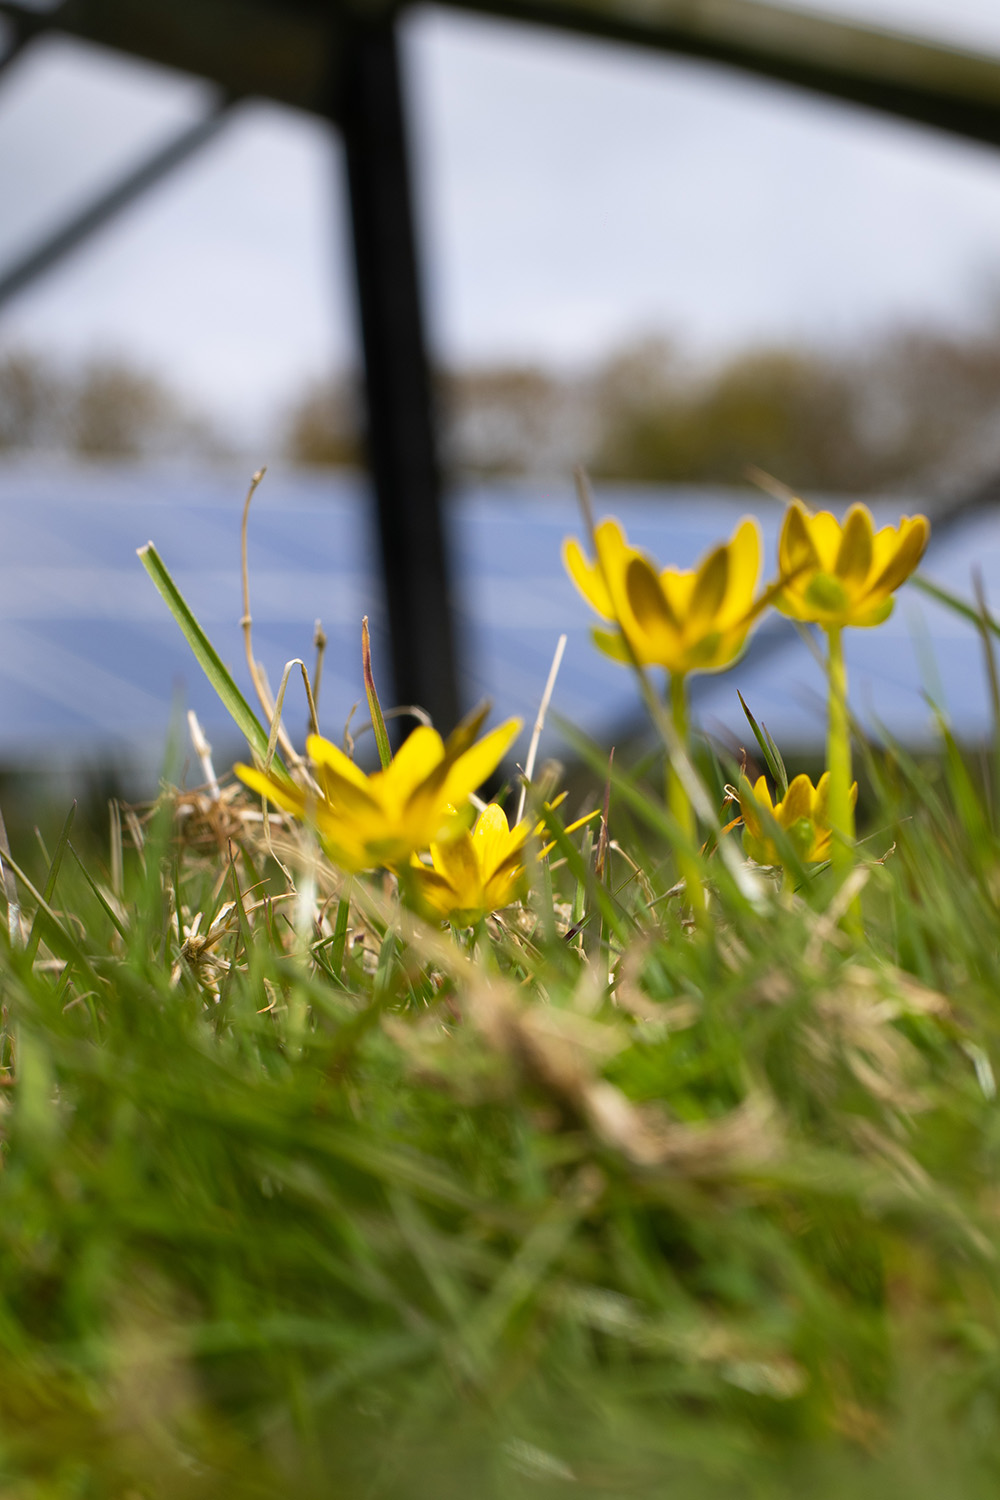 ground level shot of yellow flowers in the grass, solar panlels in the background